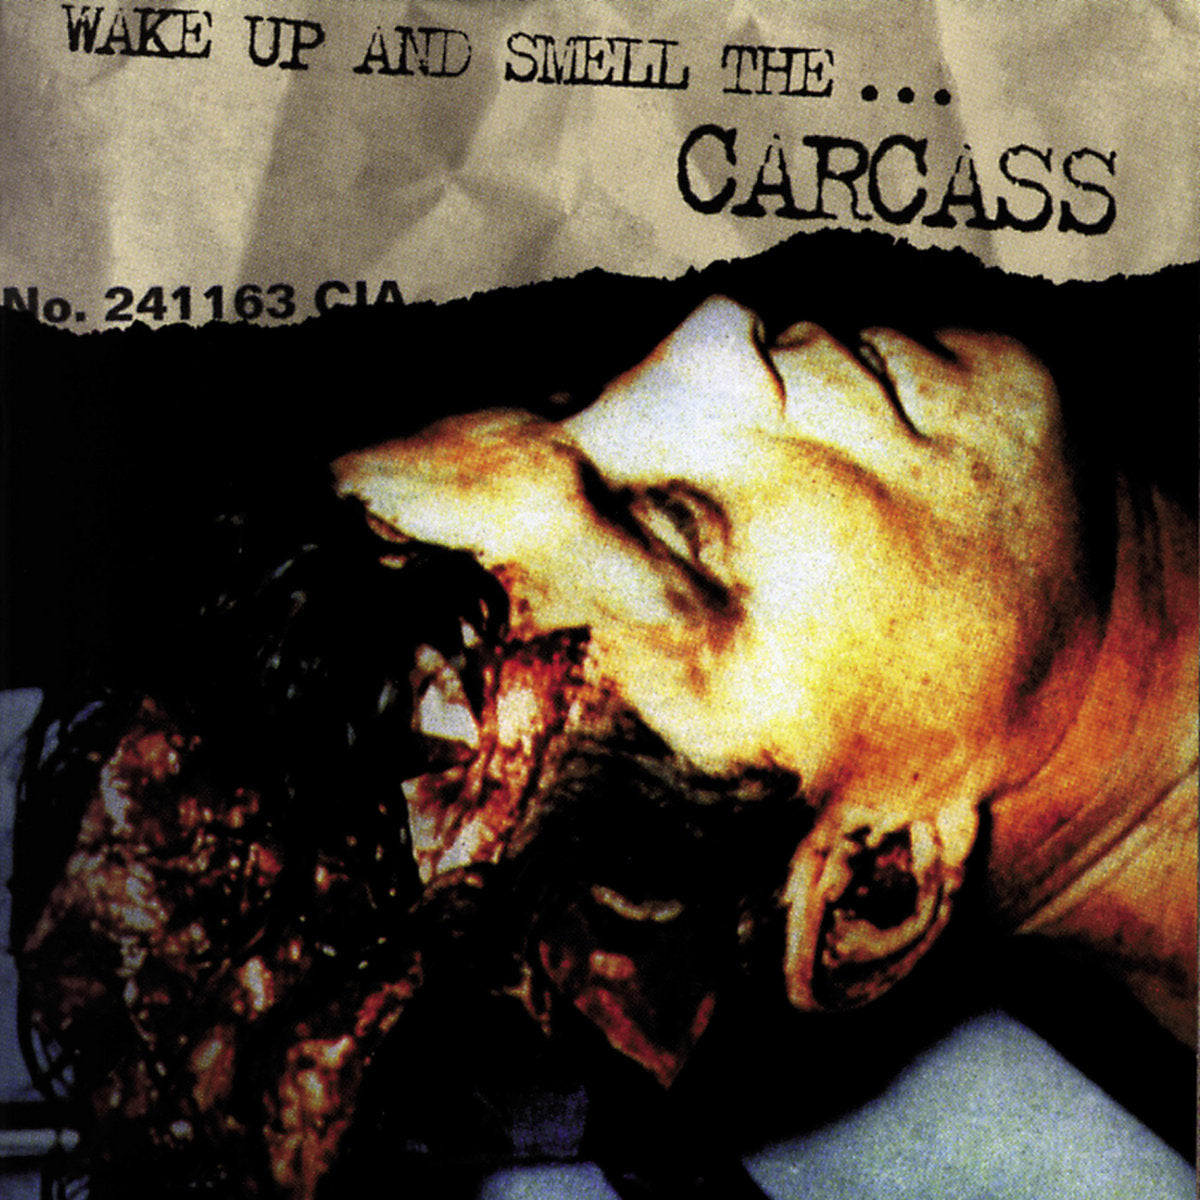 Carcass "Wake Up And Smell The..." Digital Download